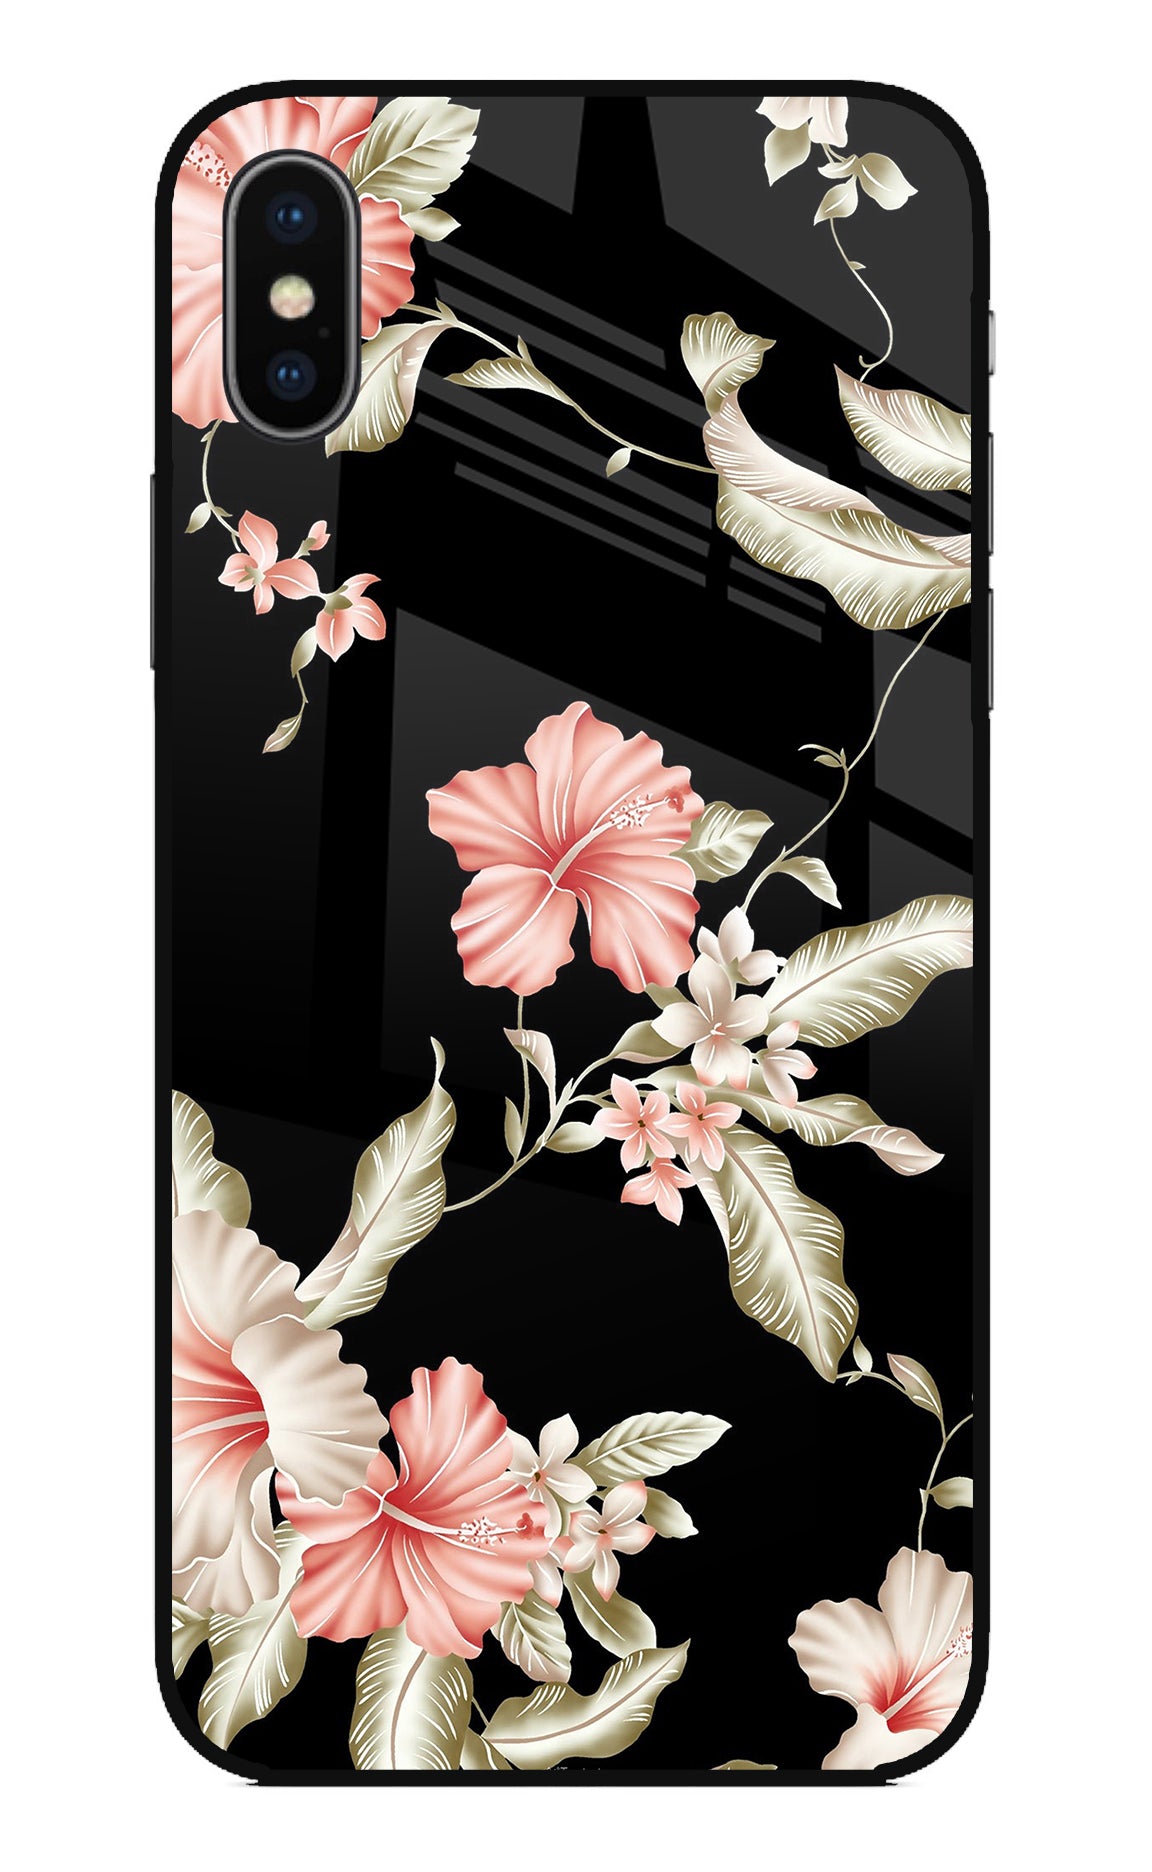 Flowers iPhone X Back Cover